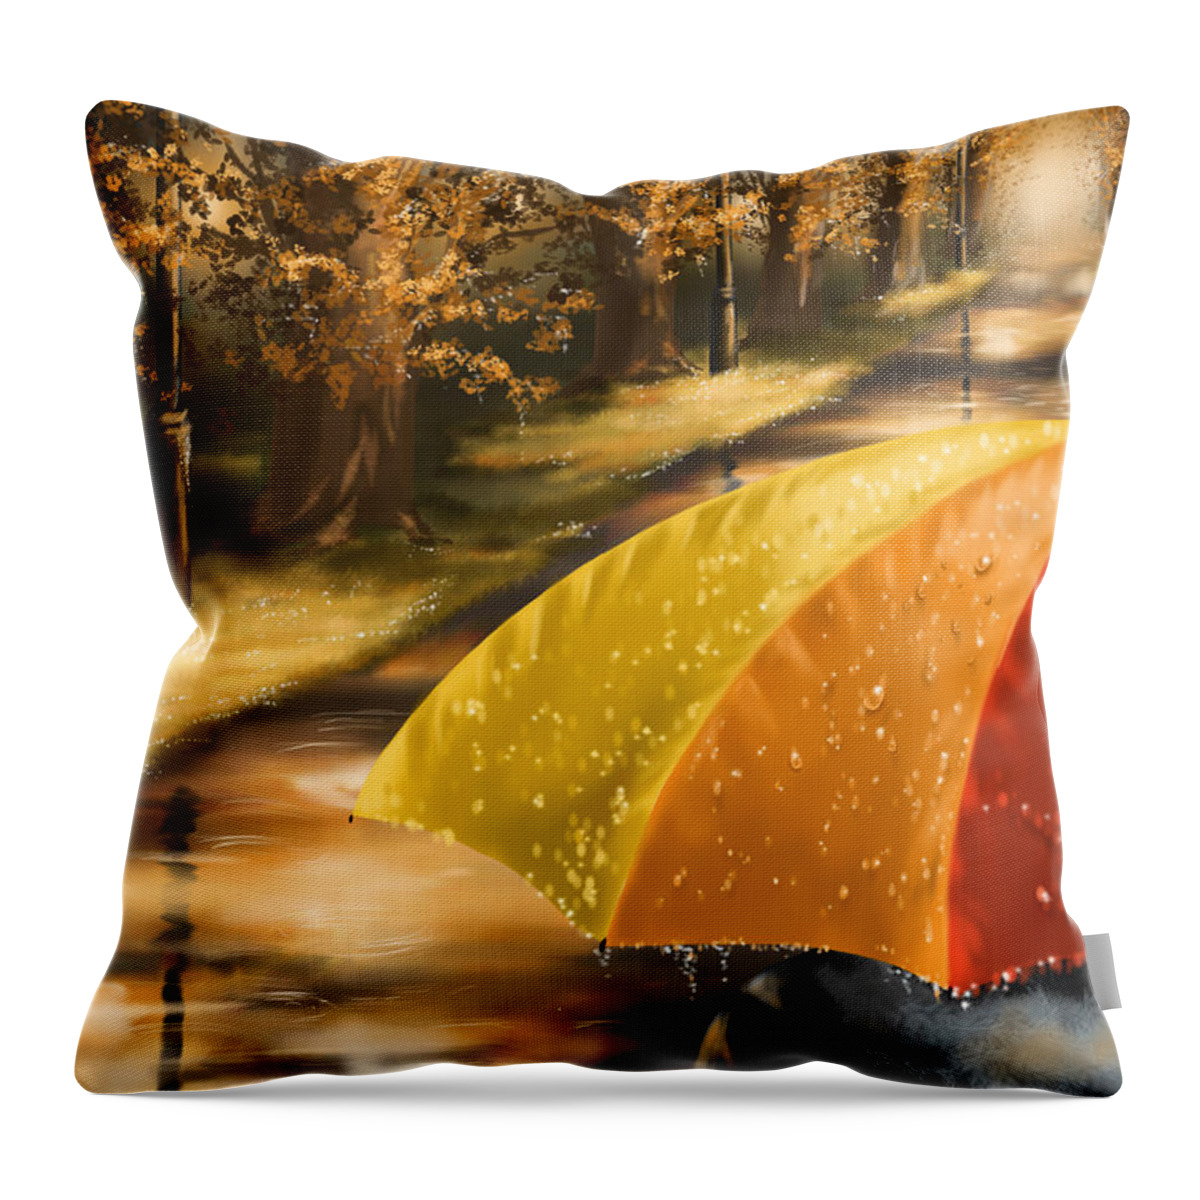 Rain Throw Pillow featuring the painting Under the rain by Veronica Minozzi